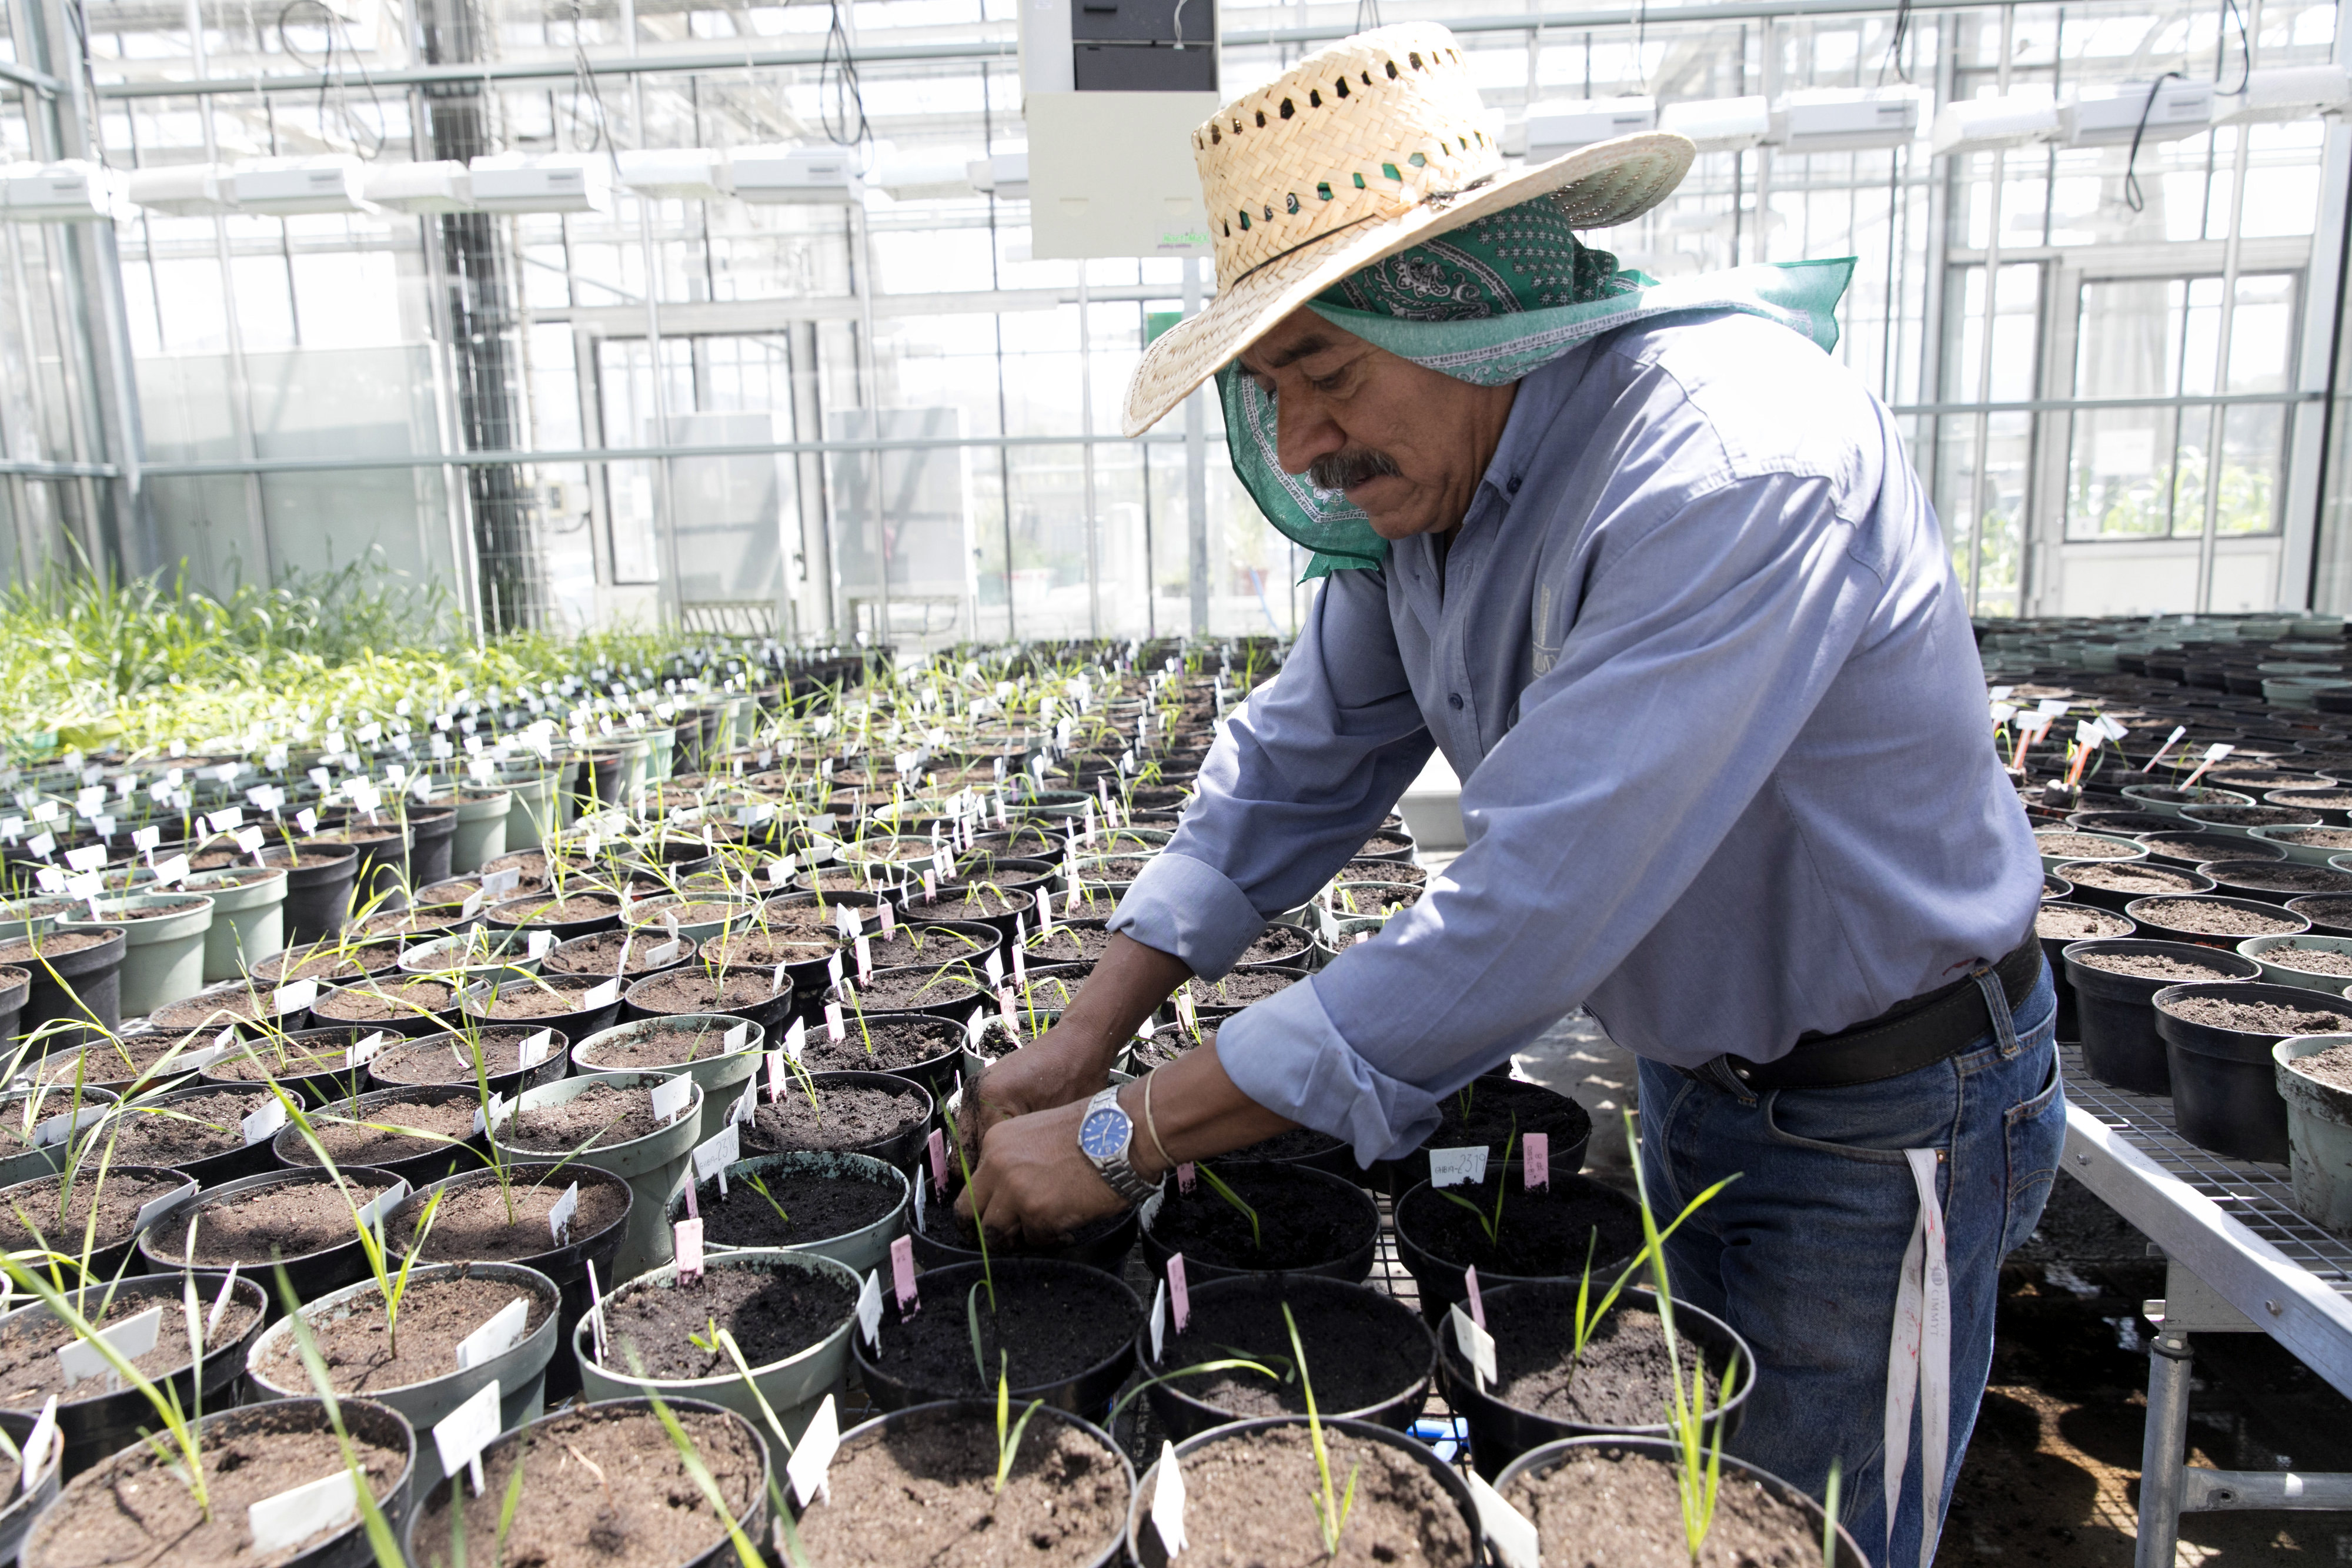 Cultivation of wheat in the greenhouse of the Agricultural Research Institute CIMMYT in Texcoco, Mexico